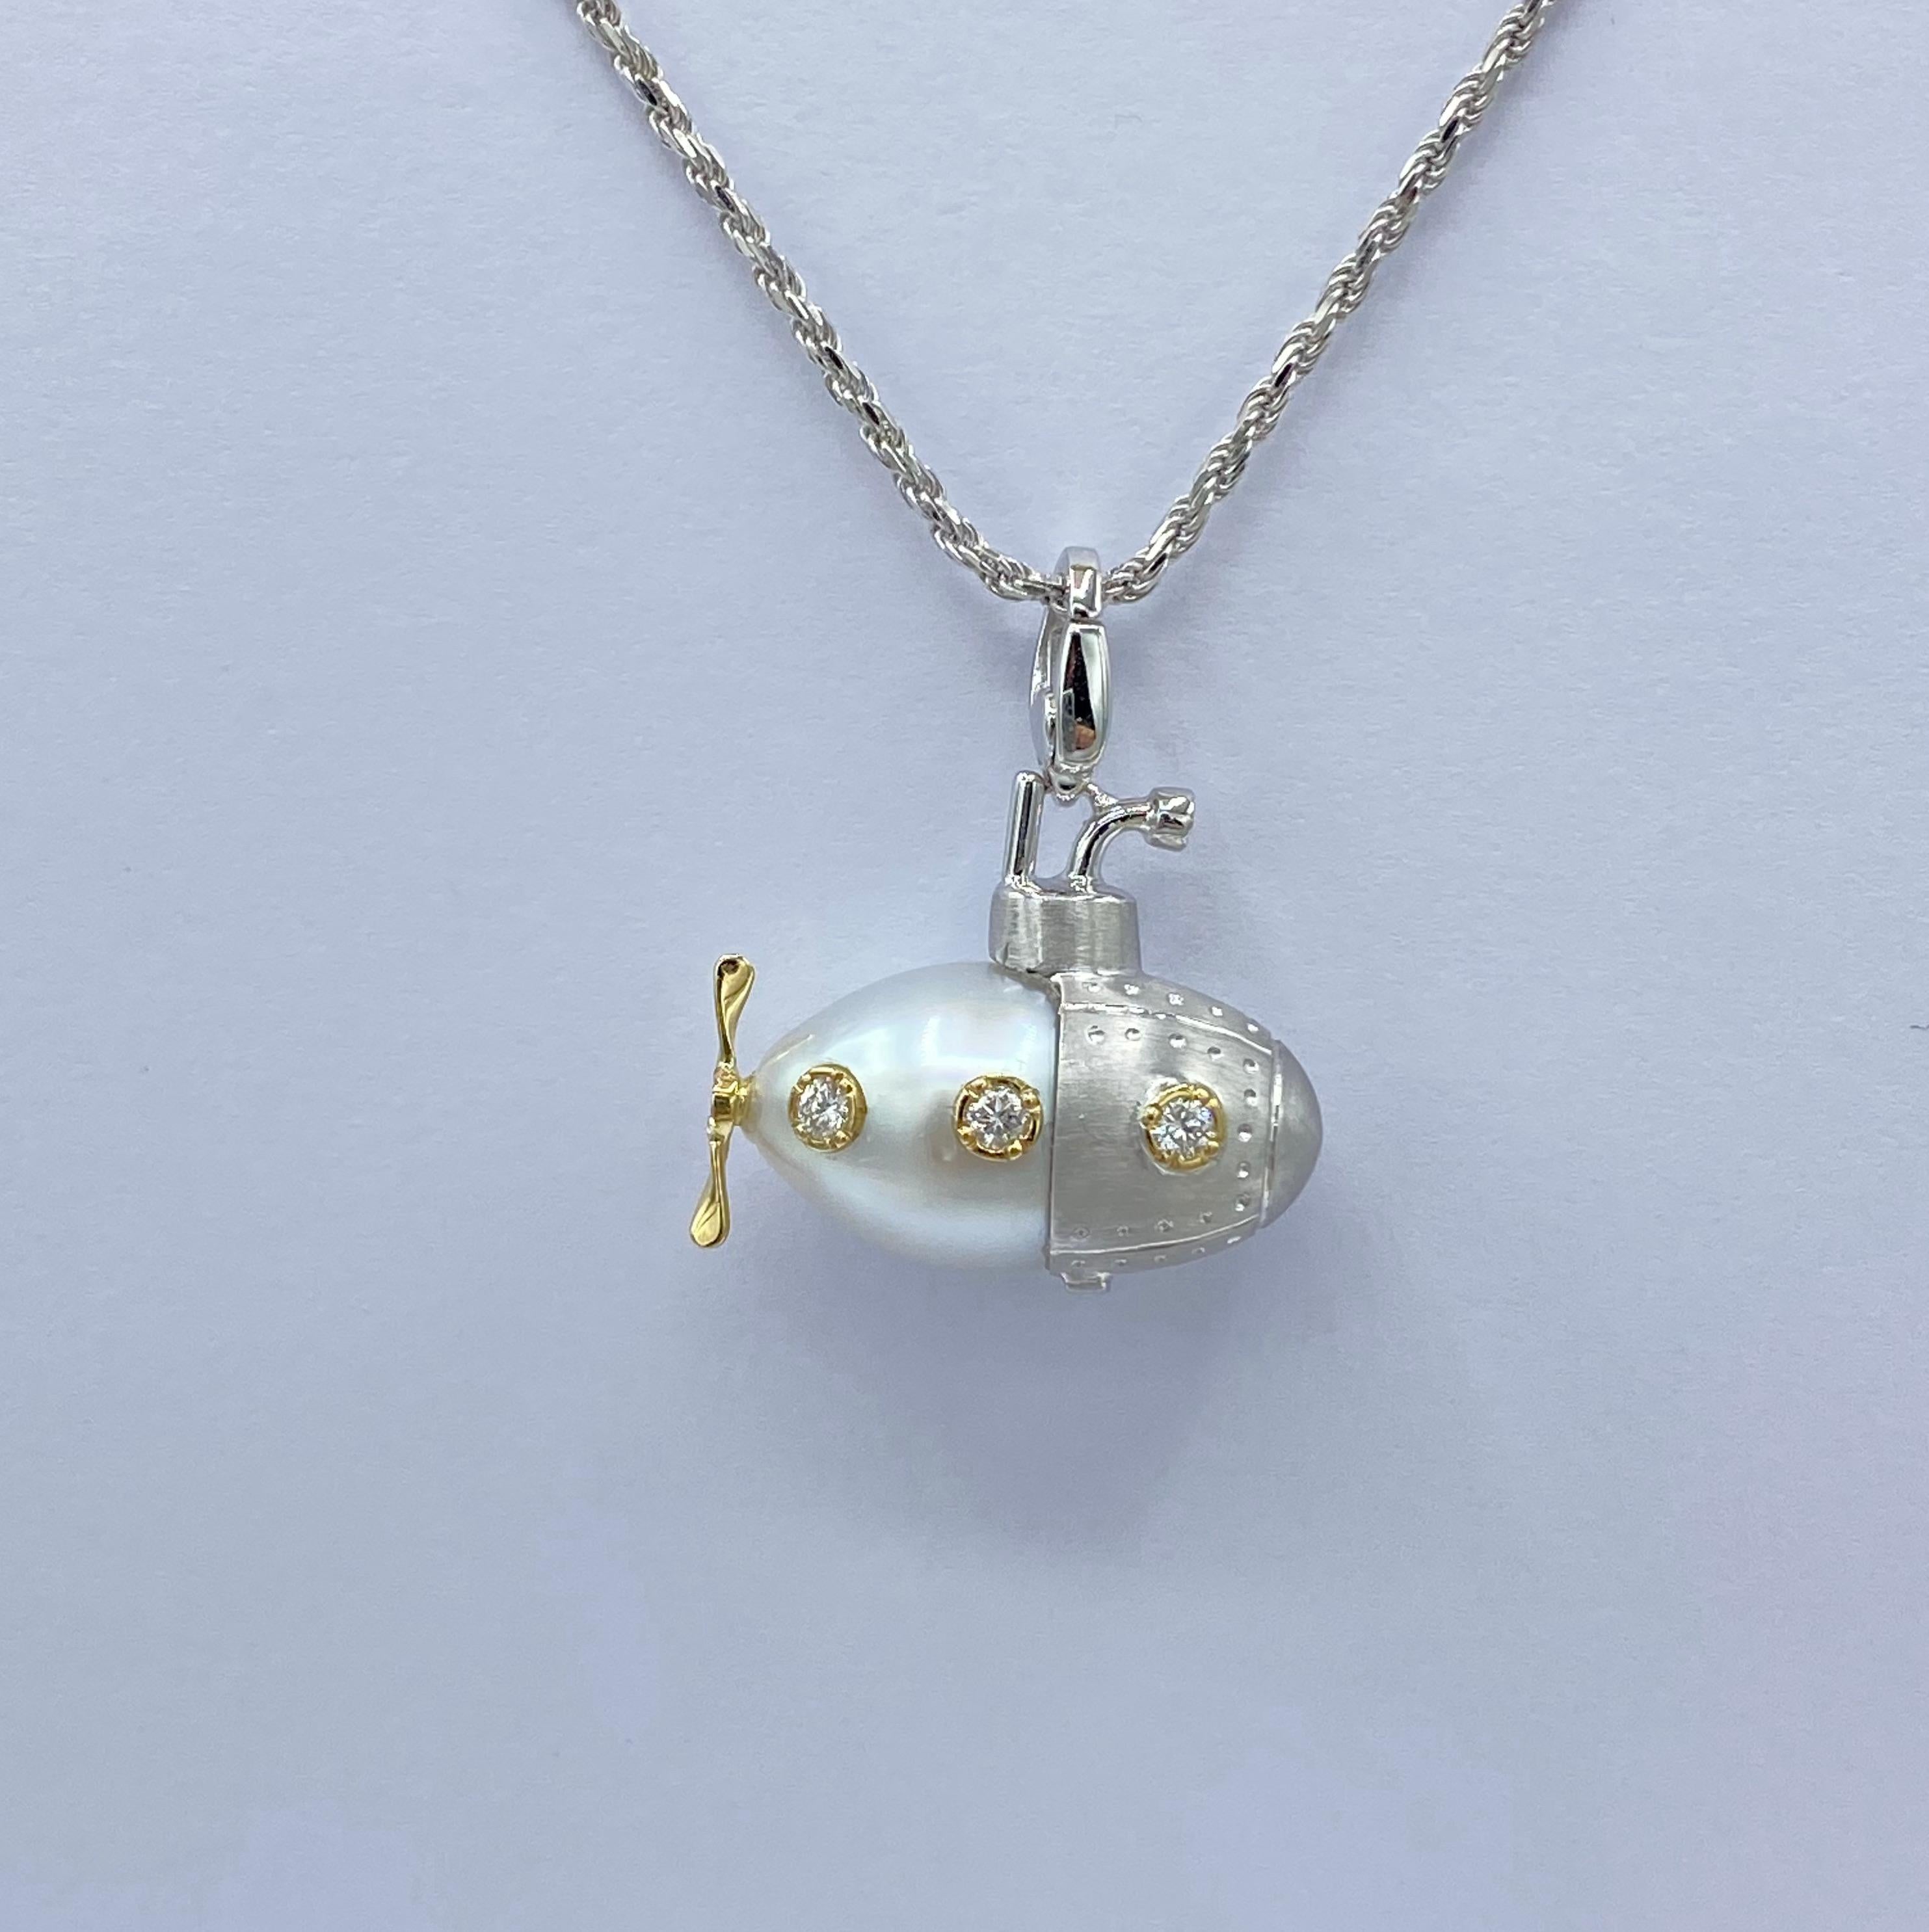 I created a submarine pendant using a slightly oval Australian pearl and lengthening it and defining its shape with white gold. The finish is satin.
The yellow gold portholes set a white diamond for each.

A blue sapphire is set on the periscope.